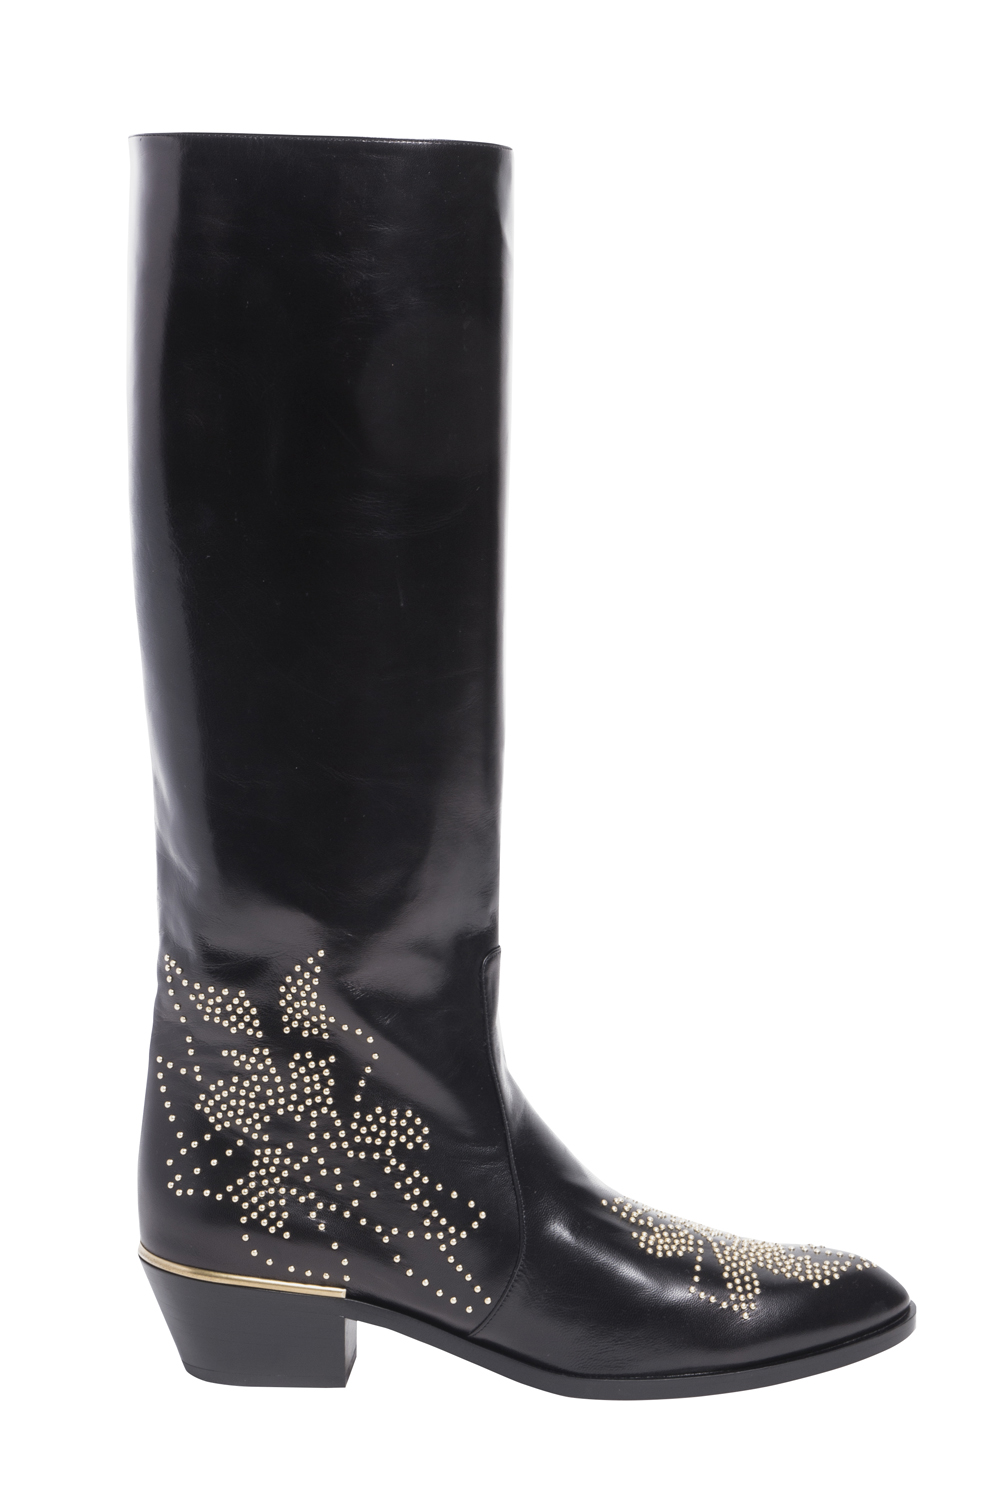 Chloé boots, $1,929, from Workshop.